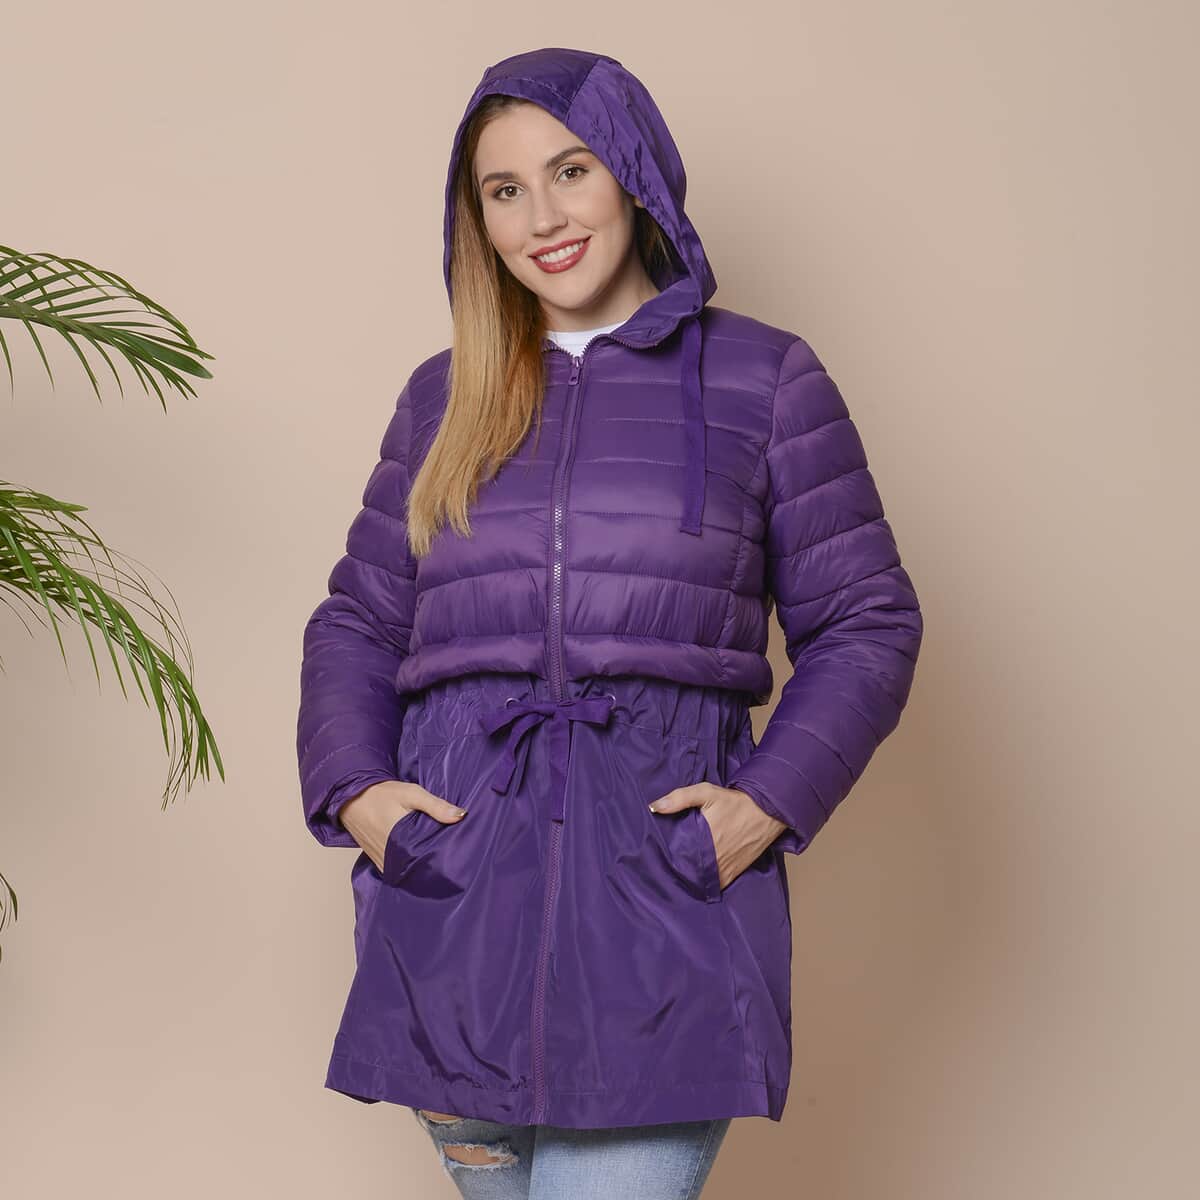 Passage Plum Purple Hooded Women's Coat with Sleeves - L image number 3